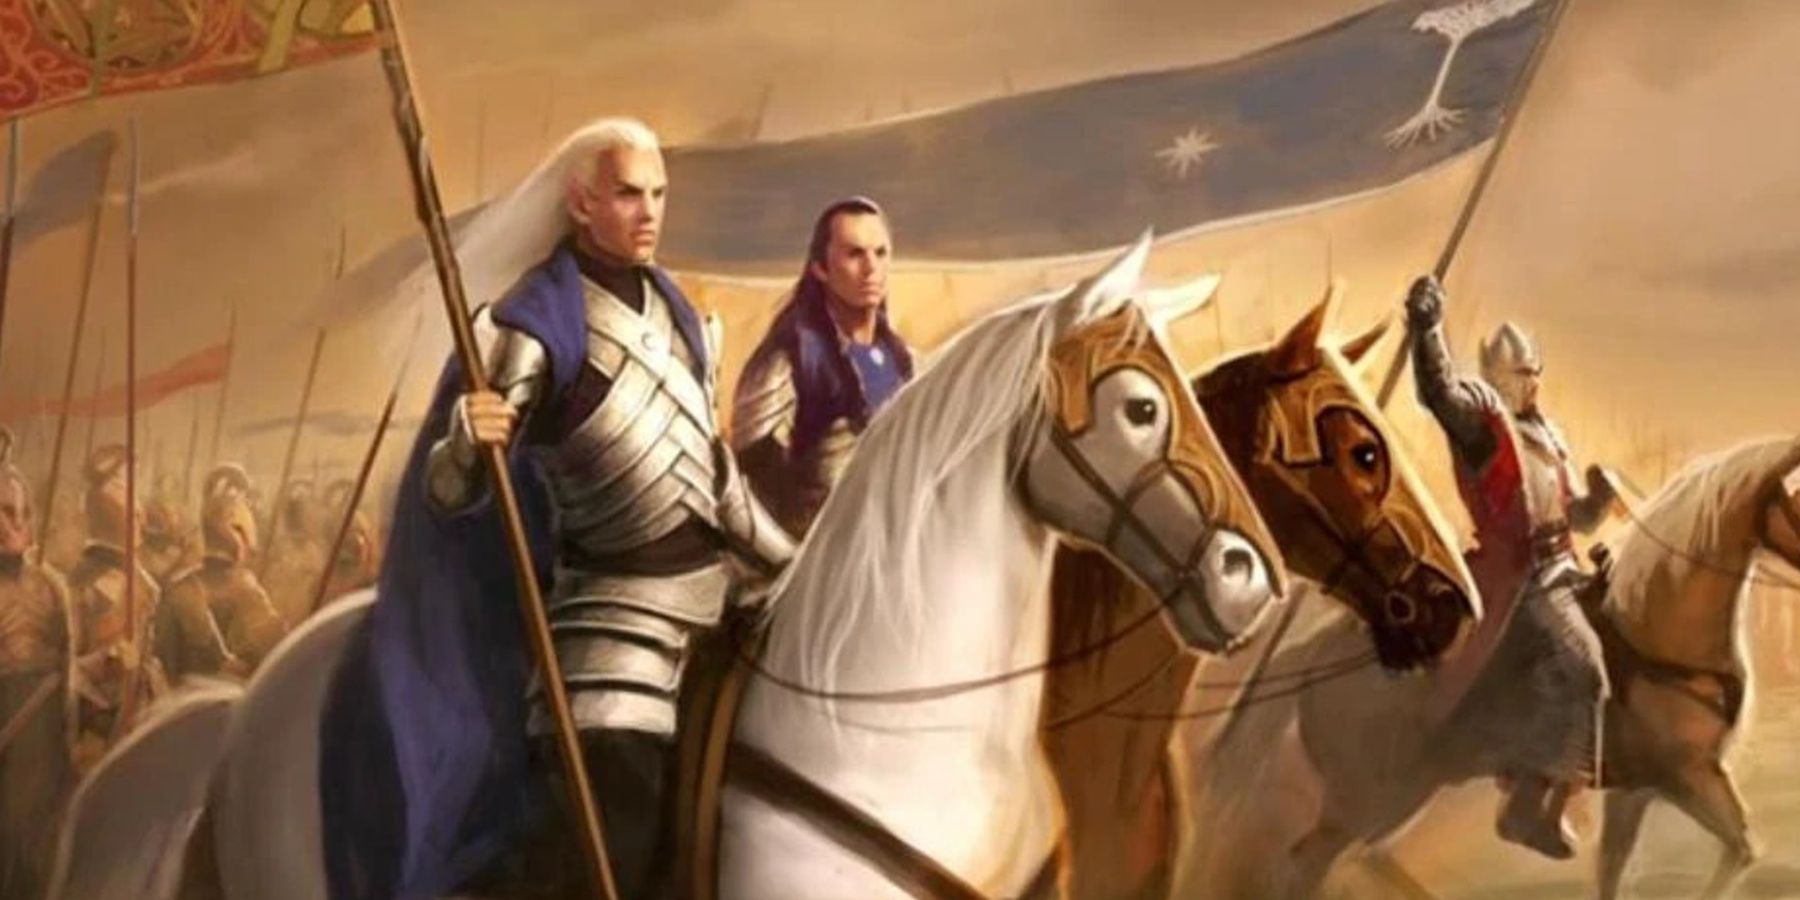 Glorfindel leads and army of elves with Gondor in the background